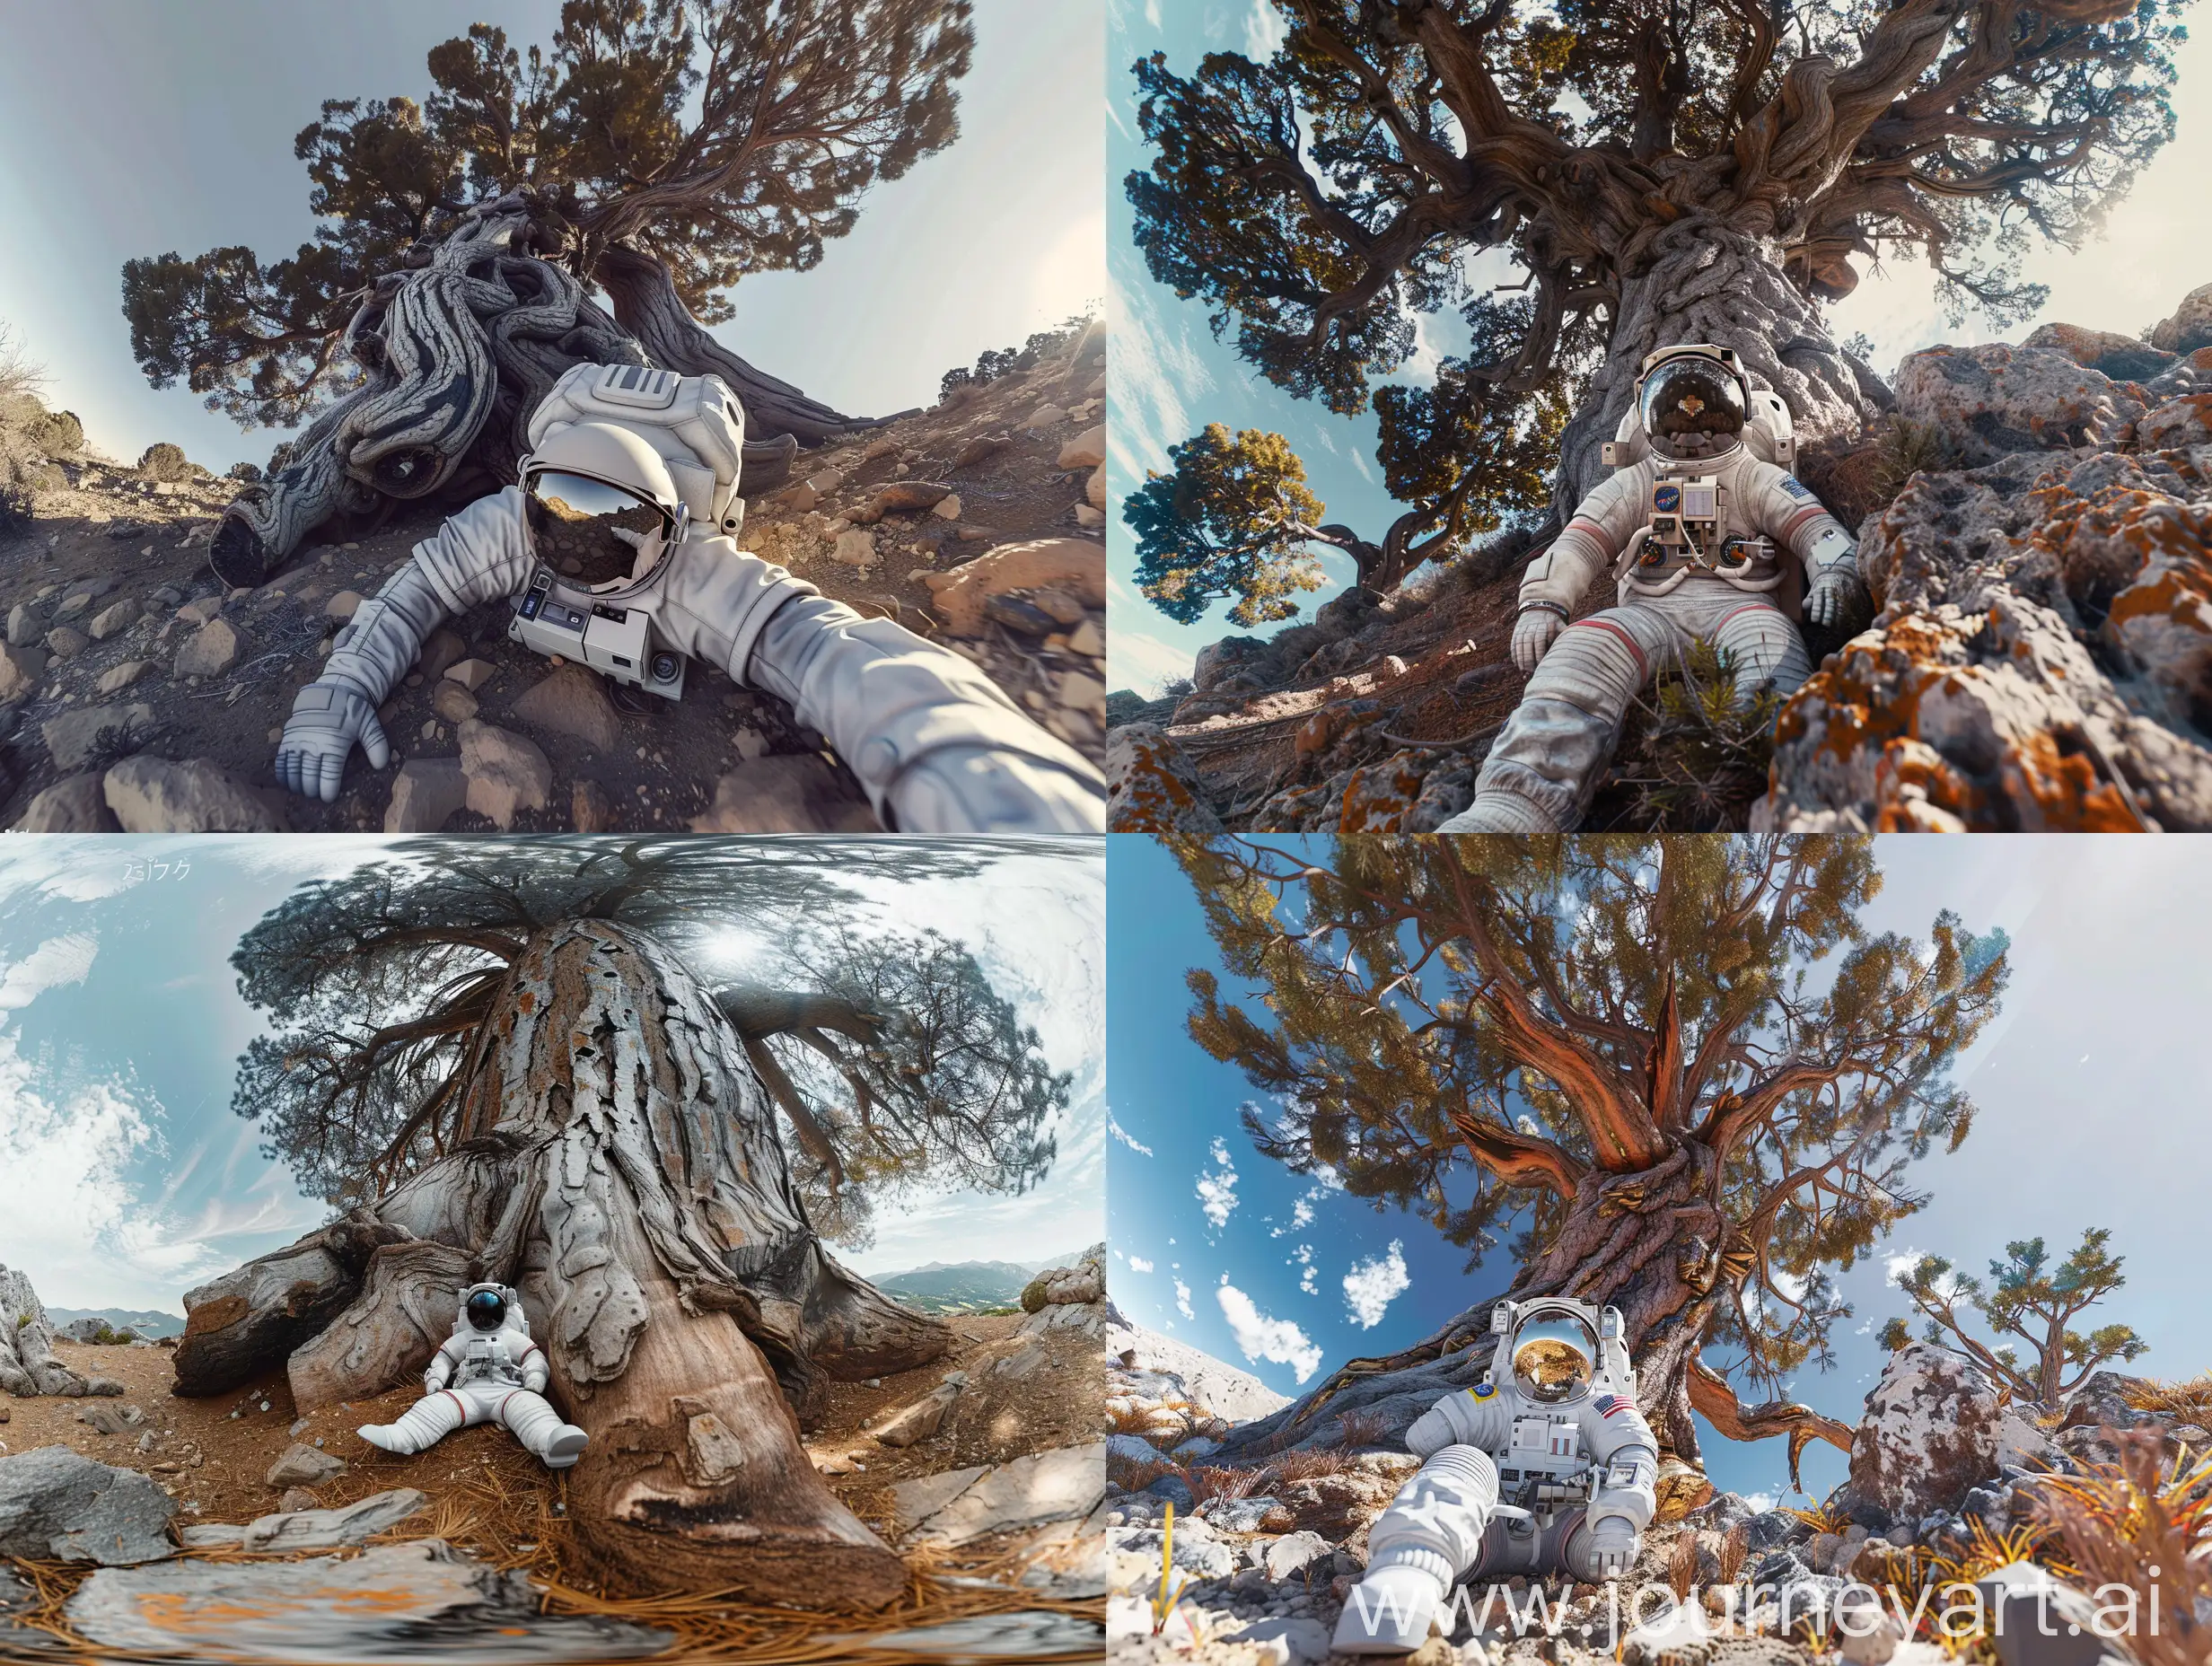 A realistic Selfie by  by Insta360 ,set in Pollino National Park, where a Astronaut at the foot of an old and giant Loricato Pine . An epic scene reminiscent of a documentary . Photo by NIKON Z9 / Canon Eos R3 / Widescreen / CGI / wide angle lens 8K resolution